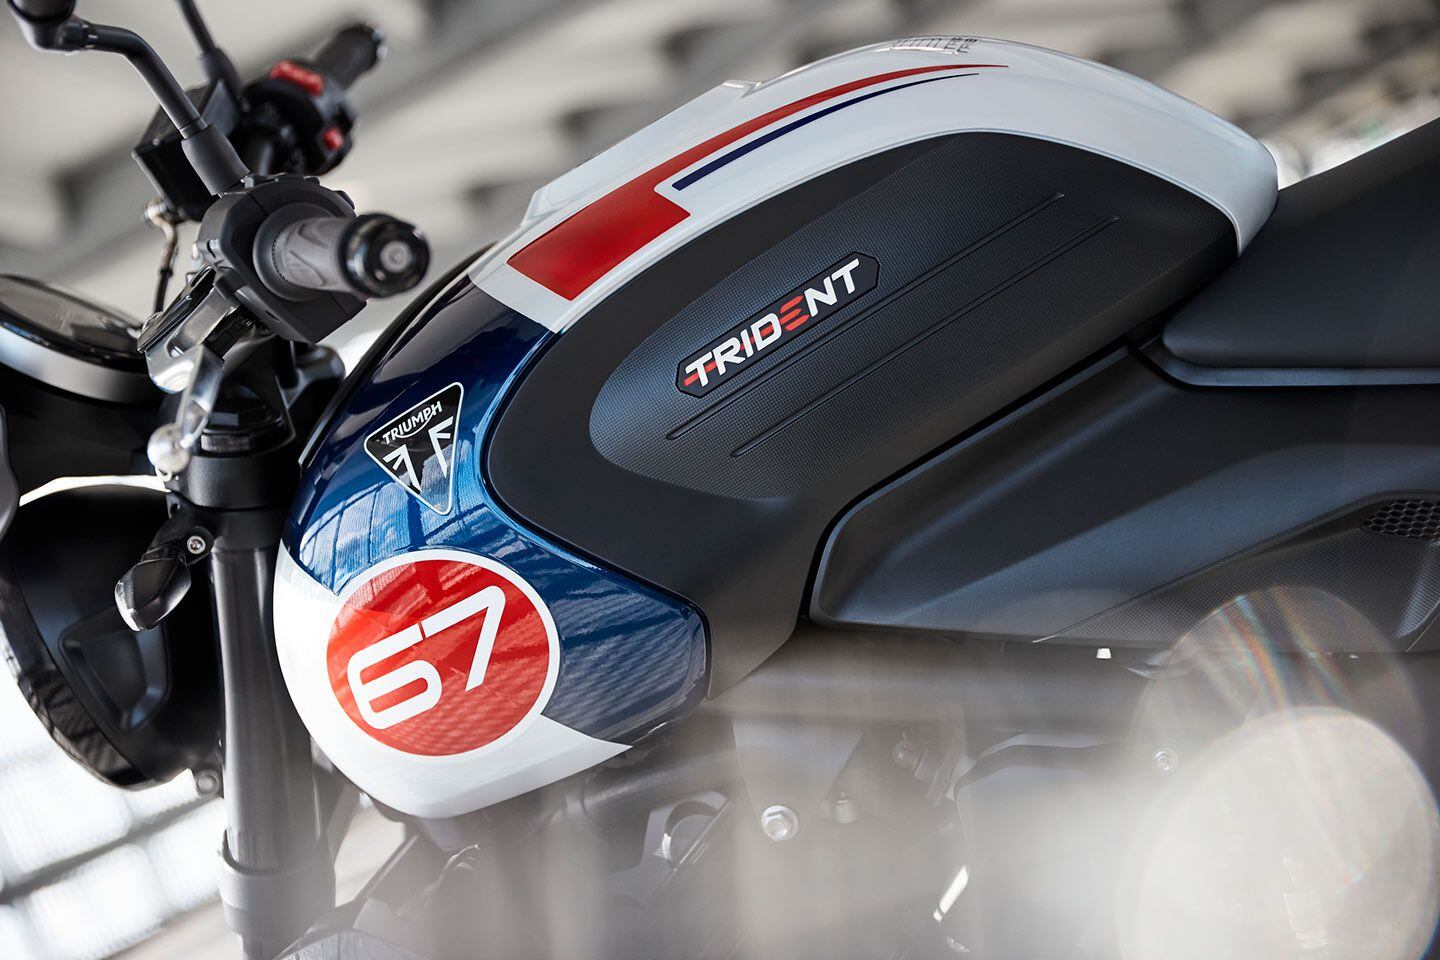 The tank covers wear the number 67 in honor of Slippery Sam, Triumph’s historic TT-winning T150 Trident.